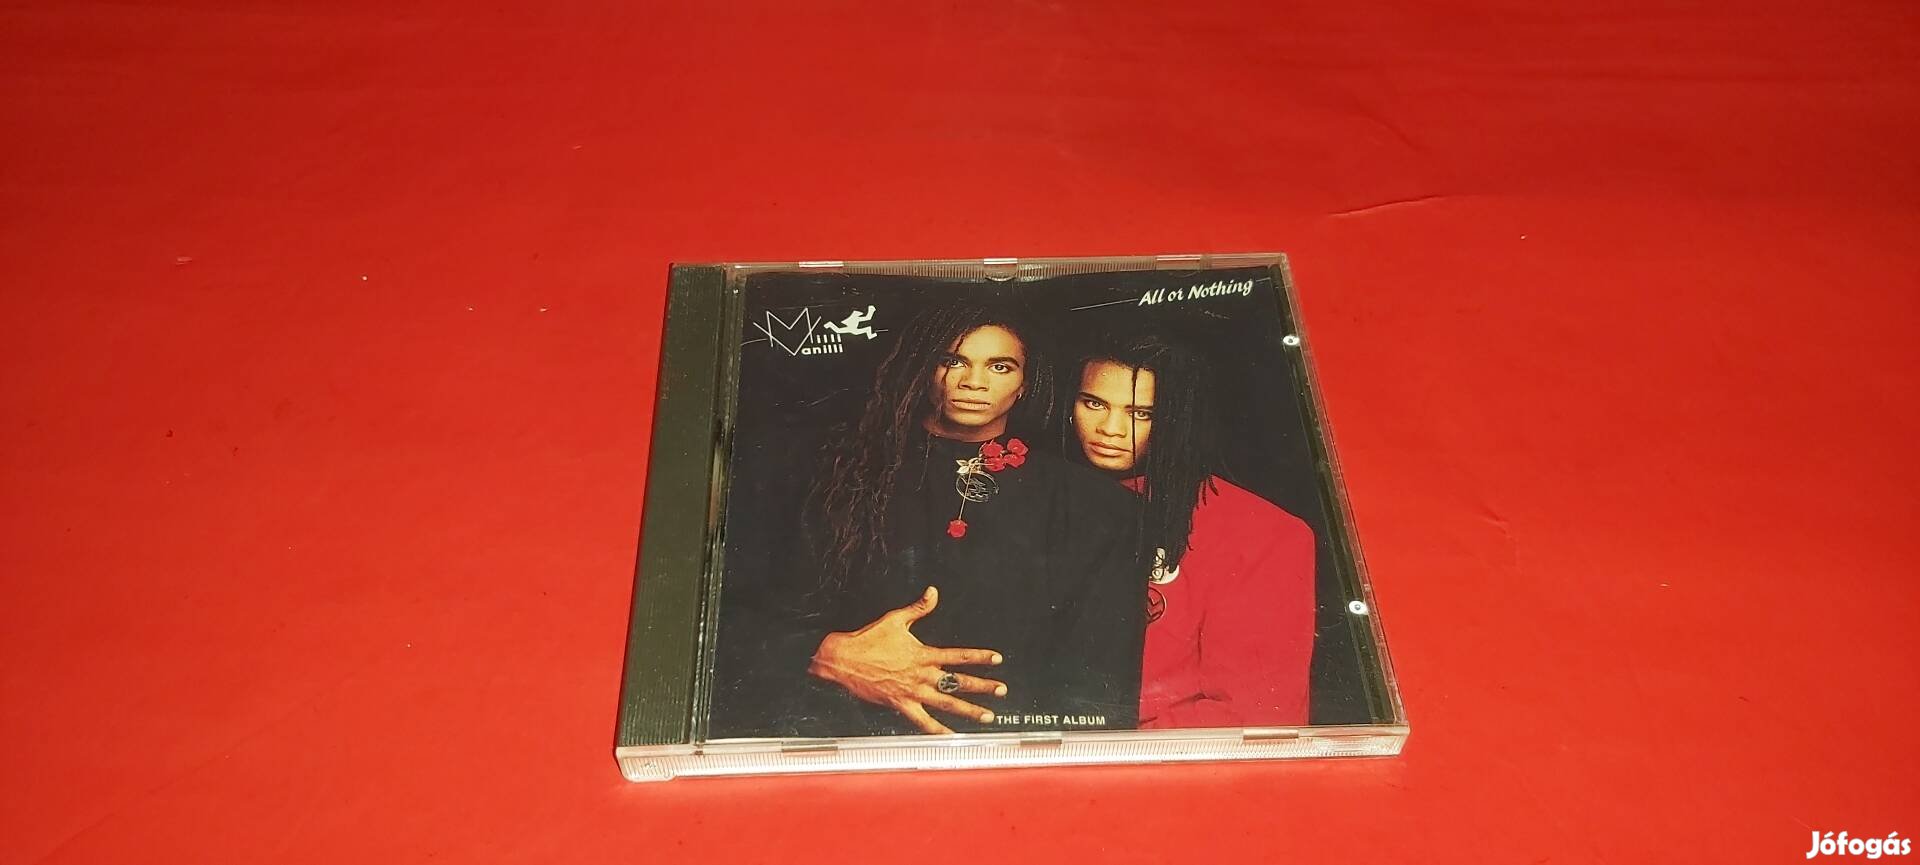 Milli Vanilli All or nothing Cd 1988